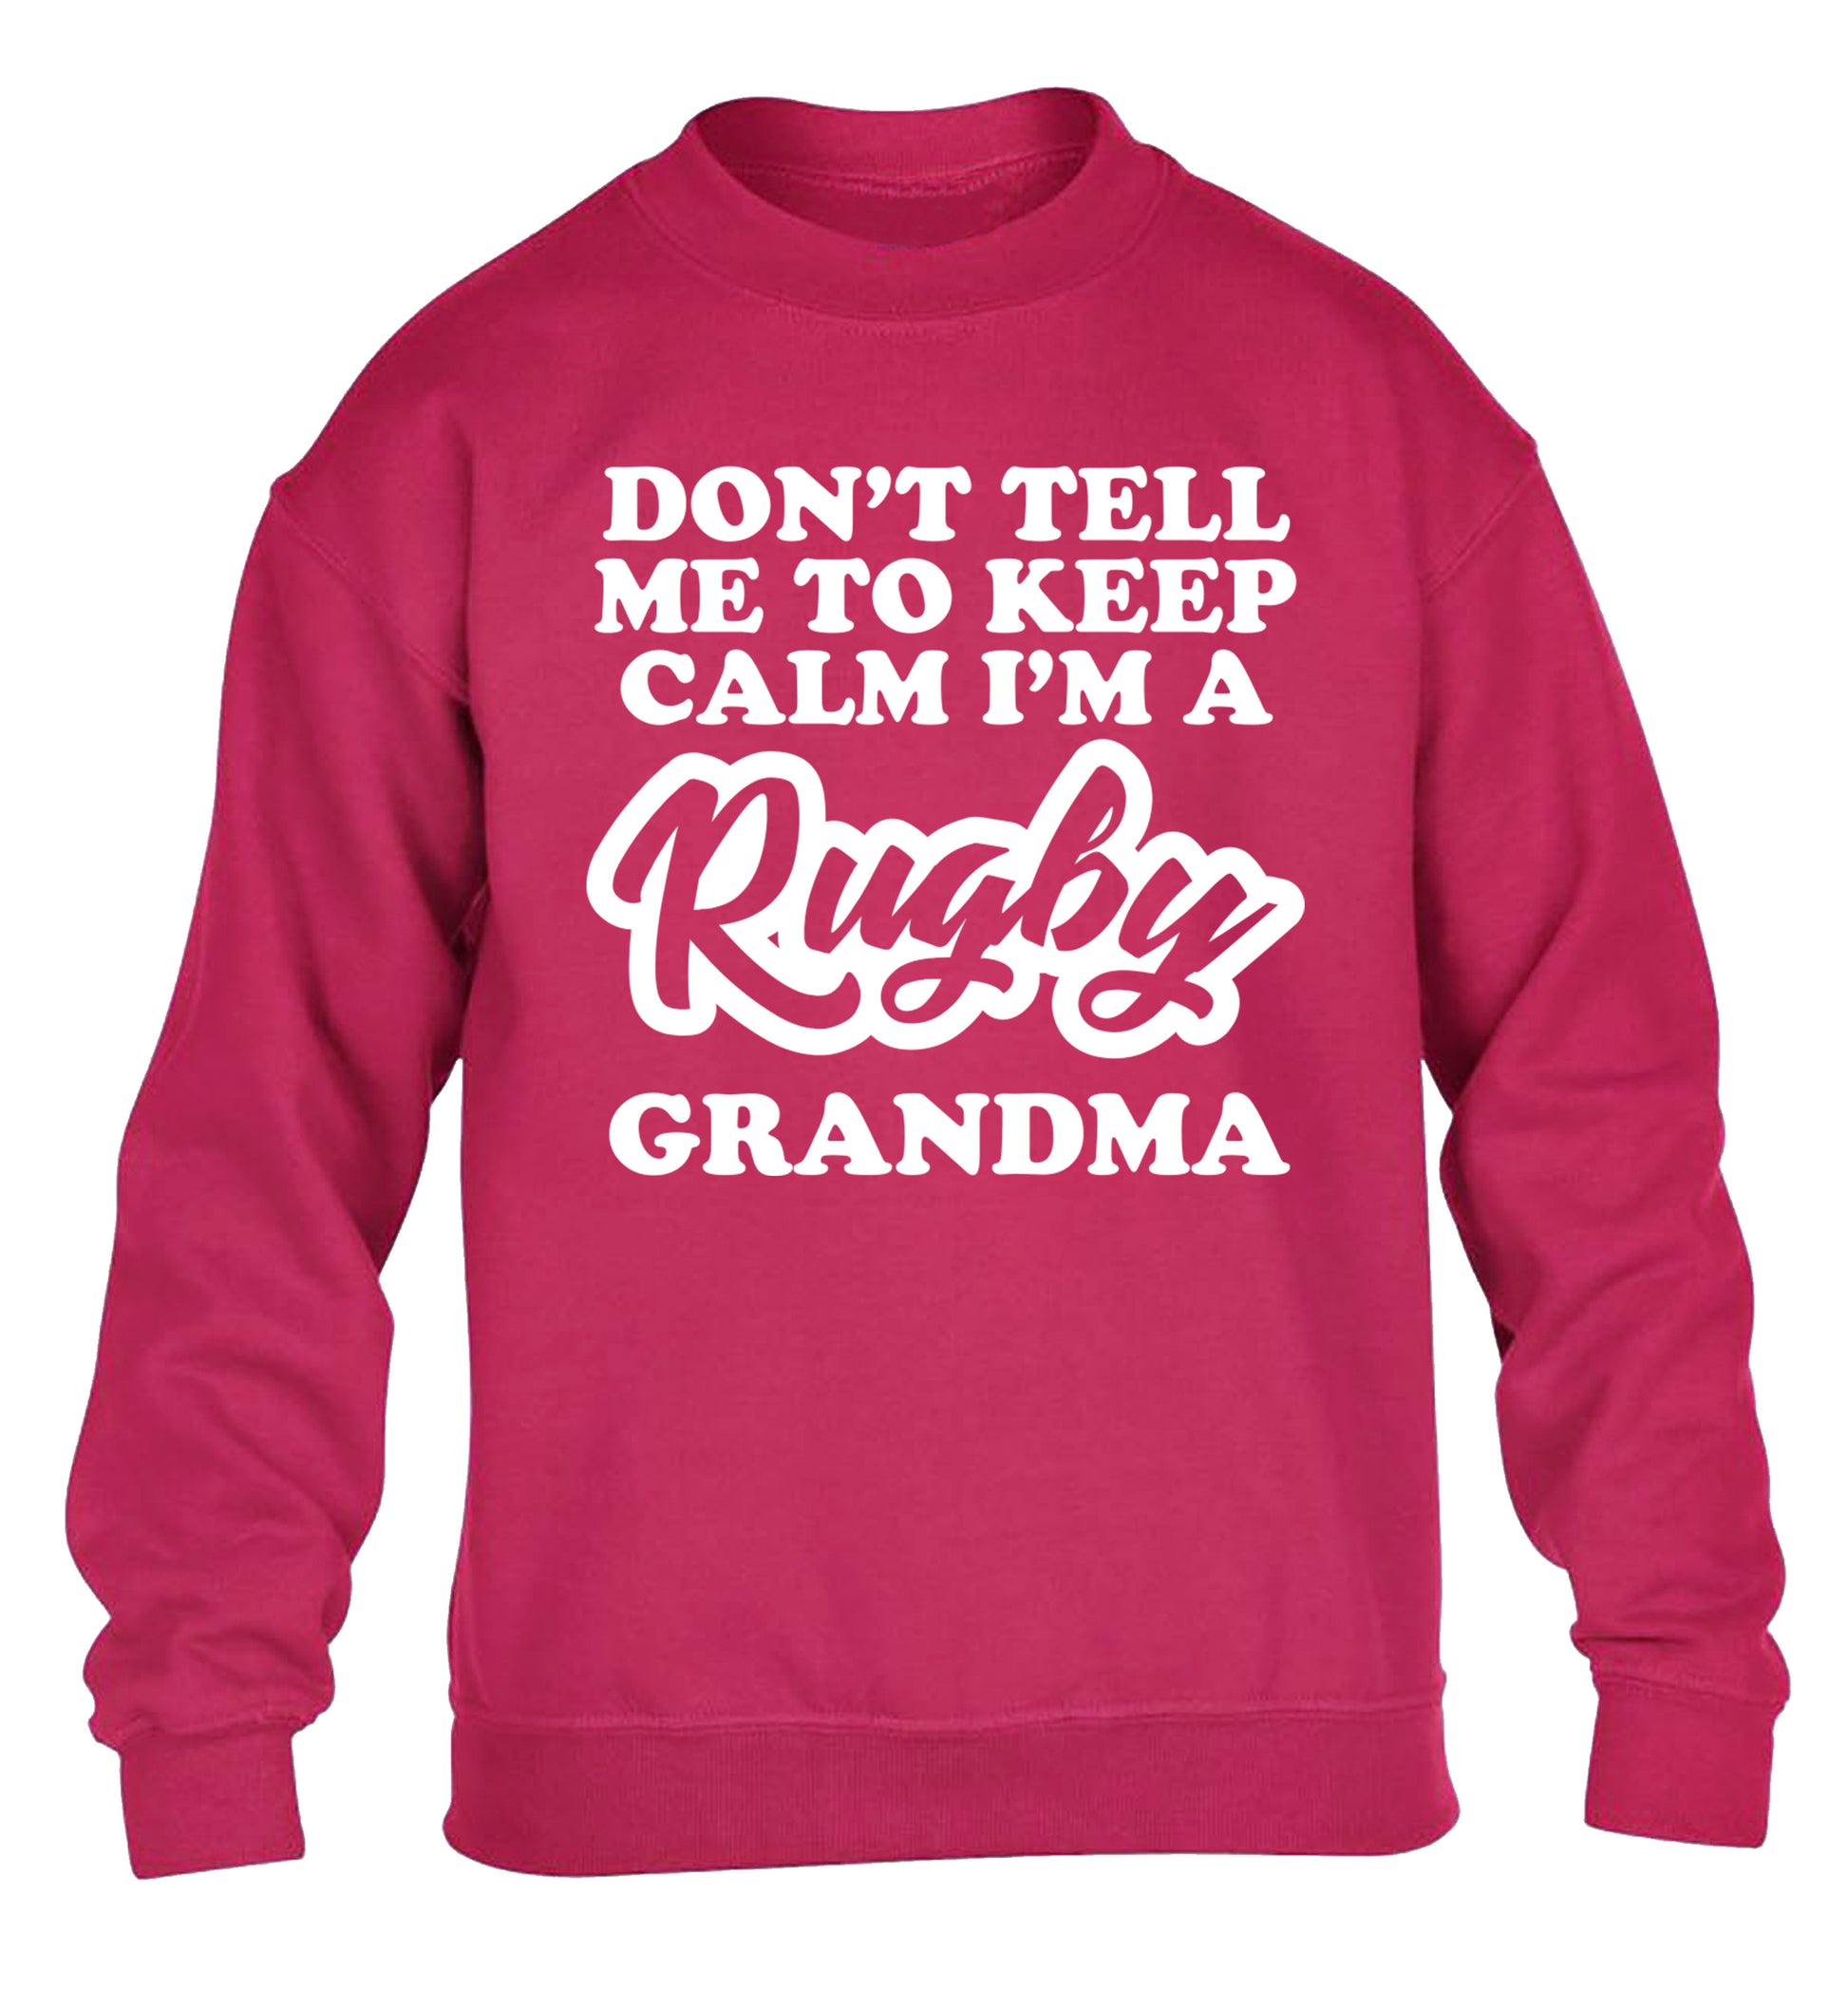 Don't tell me to keep calm I'm a rugby grandma children's pink sweater 12-13 Years